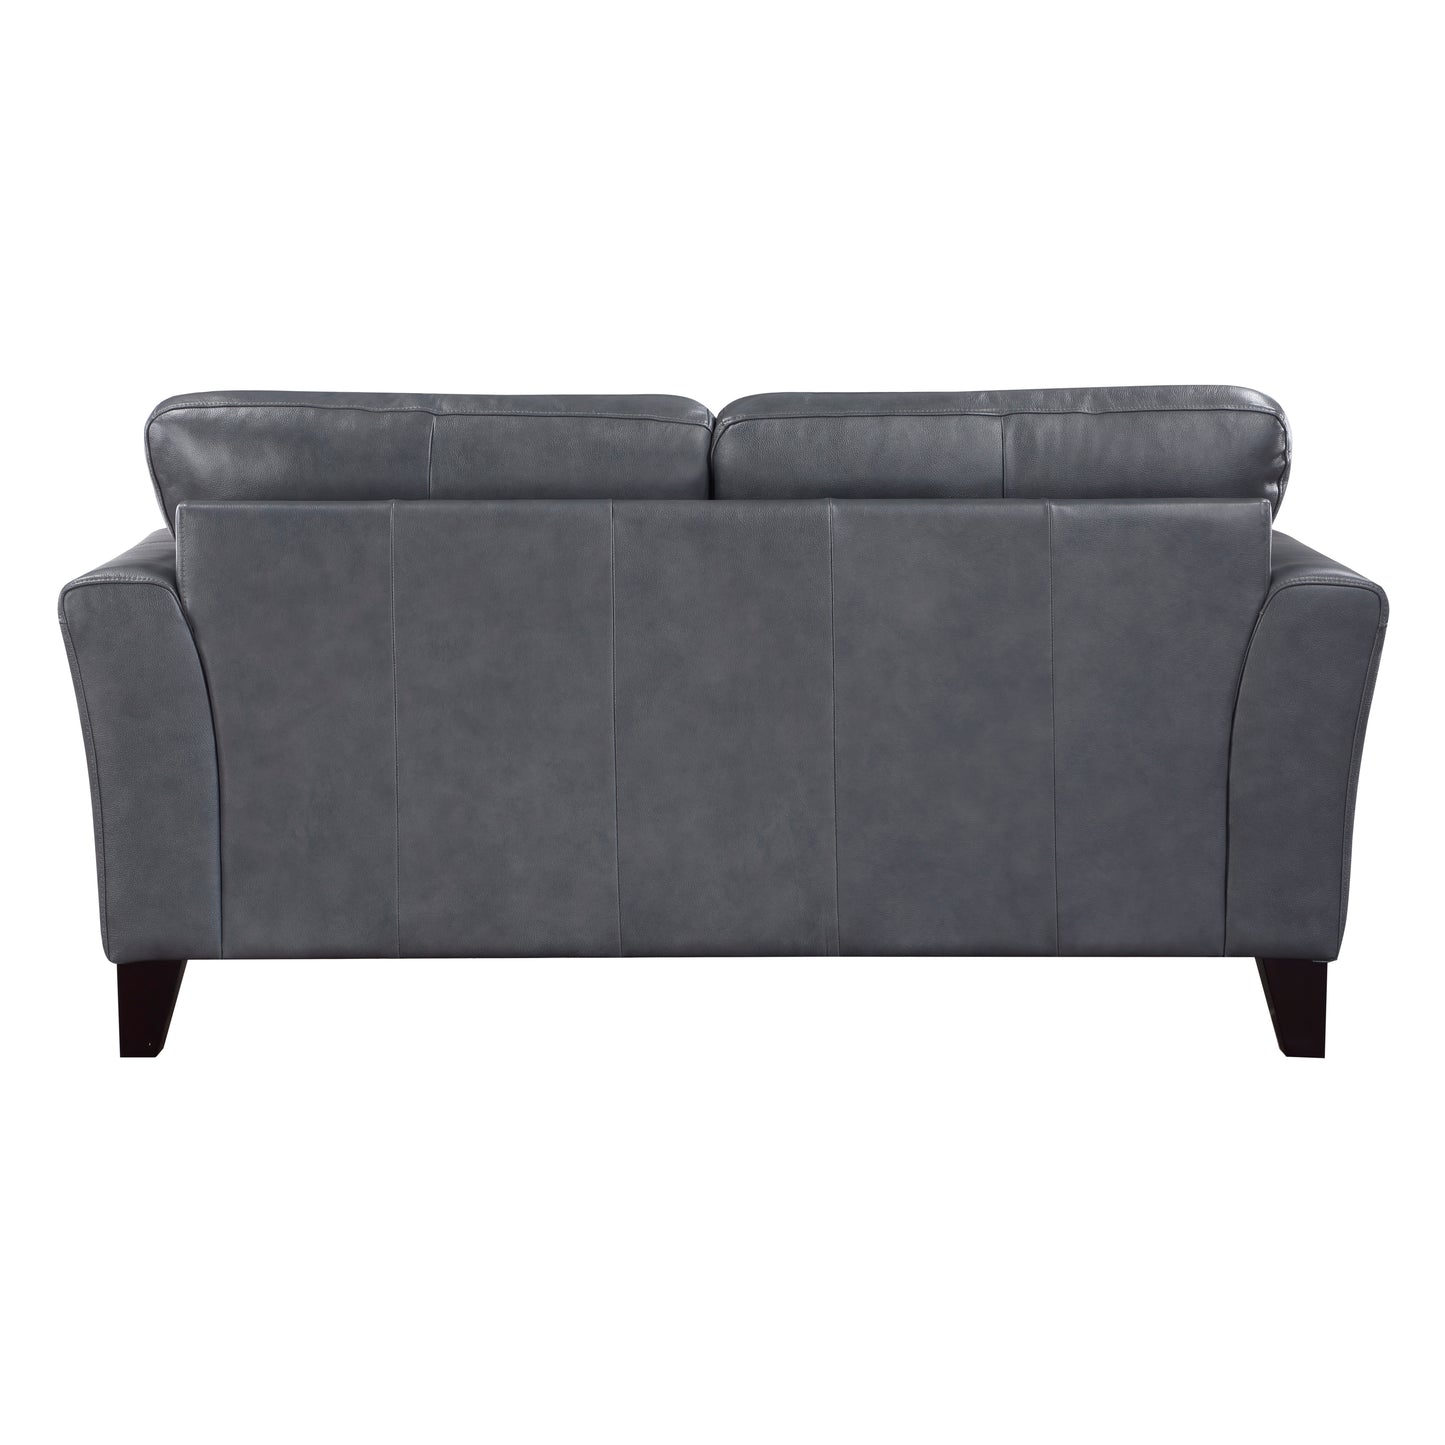 Thierry Top Grain Leather Loveseat BURNISH-GREY